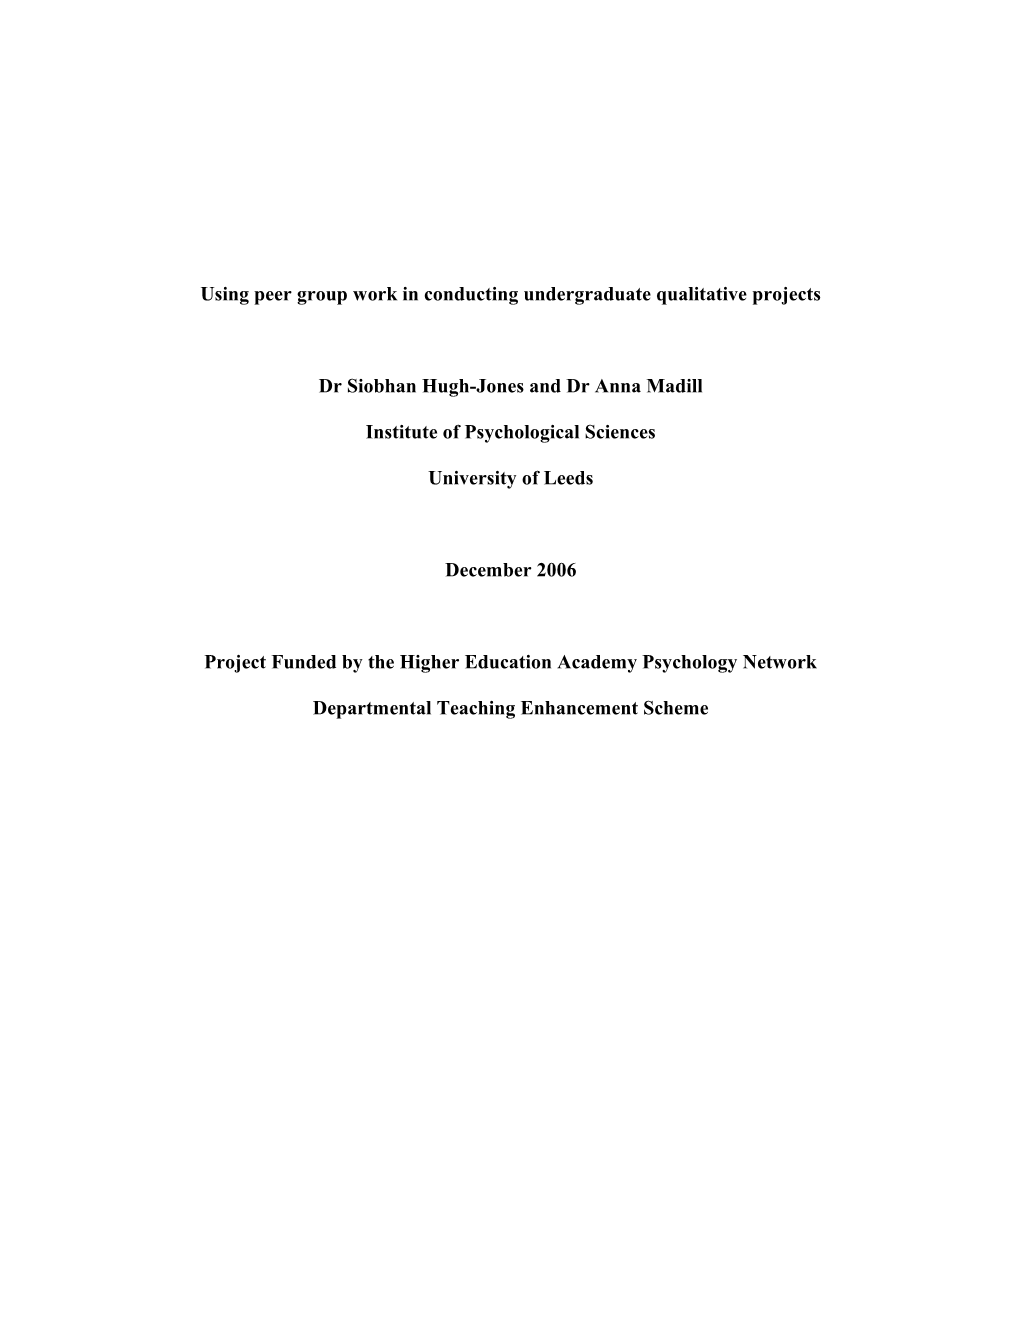 Using Peer Group Work in Conducting Undergraduate Qualitative Projects